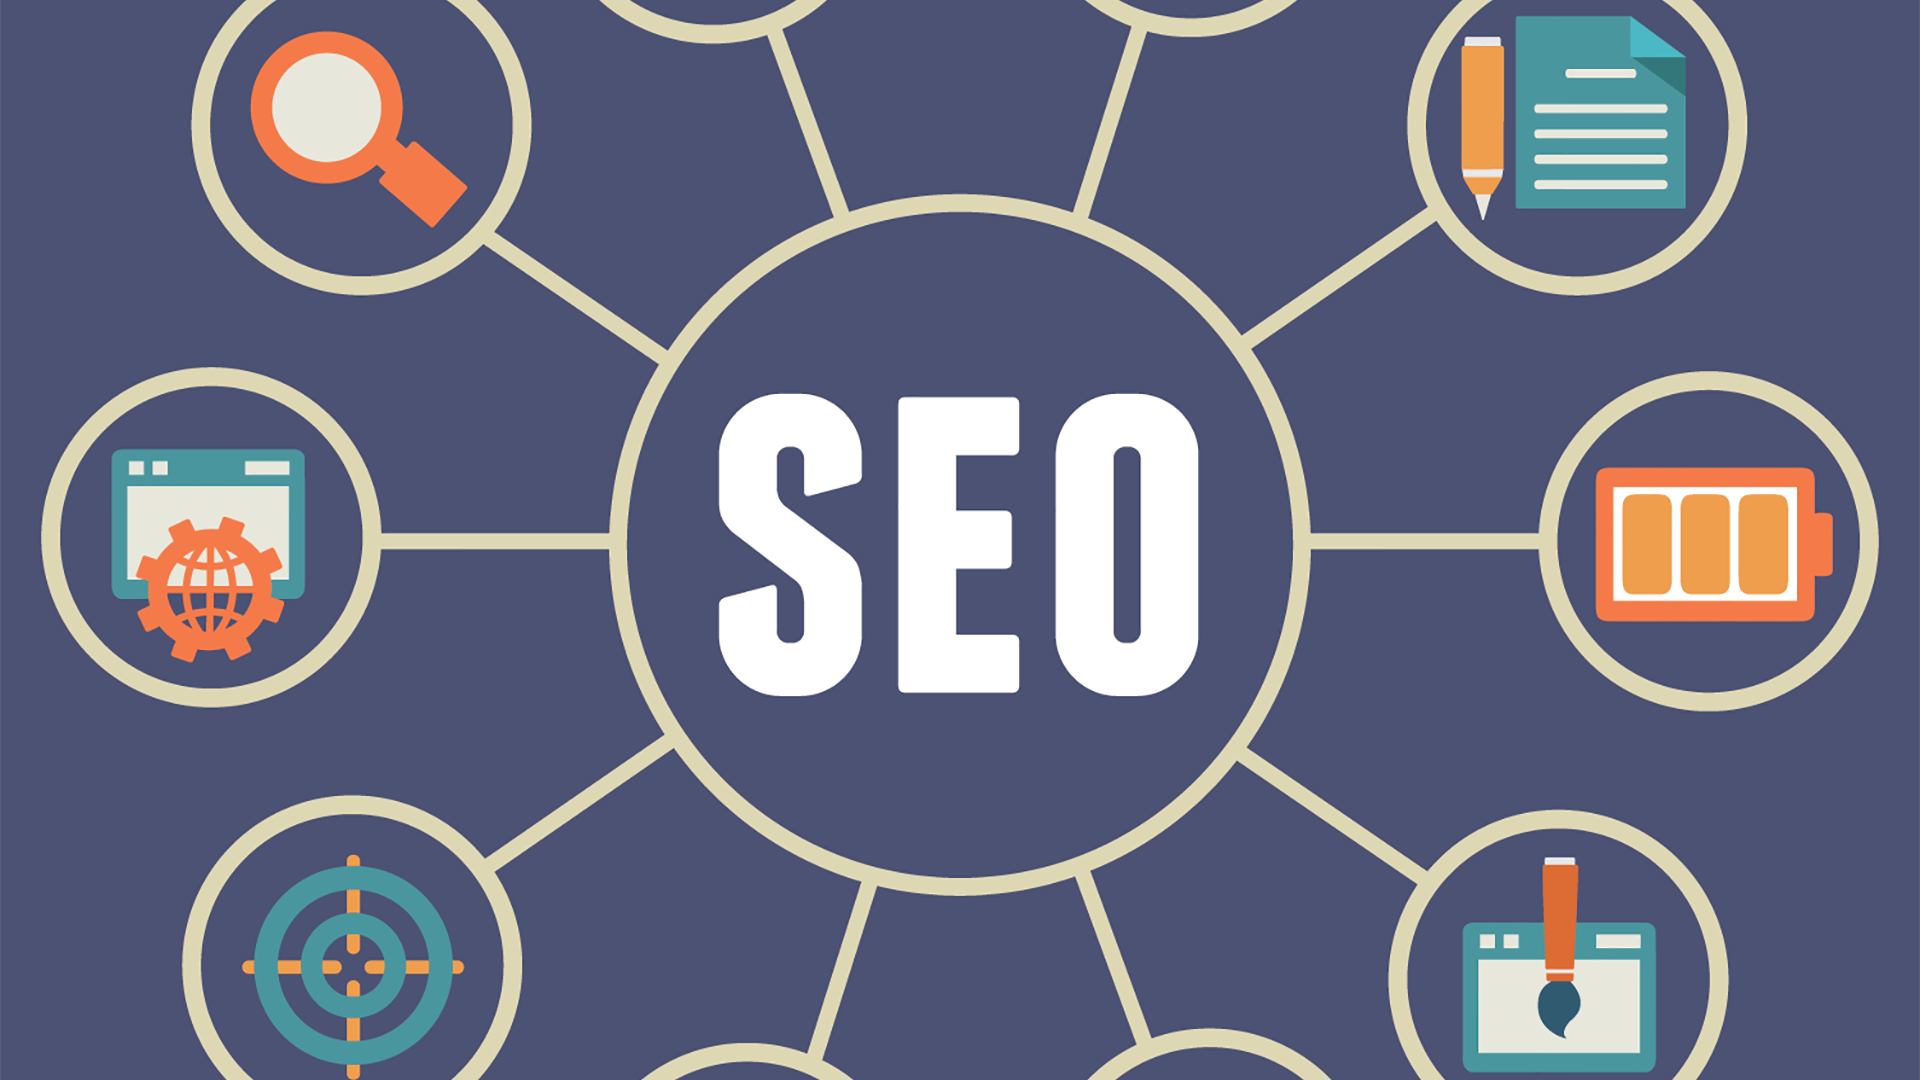 How To Have SEO With Minimal Spending